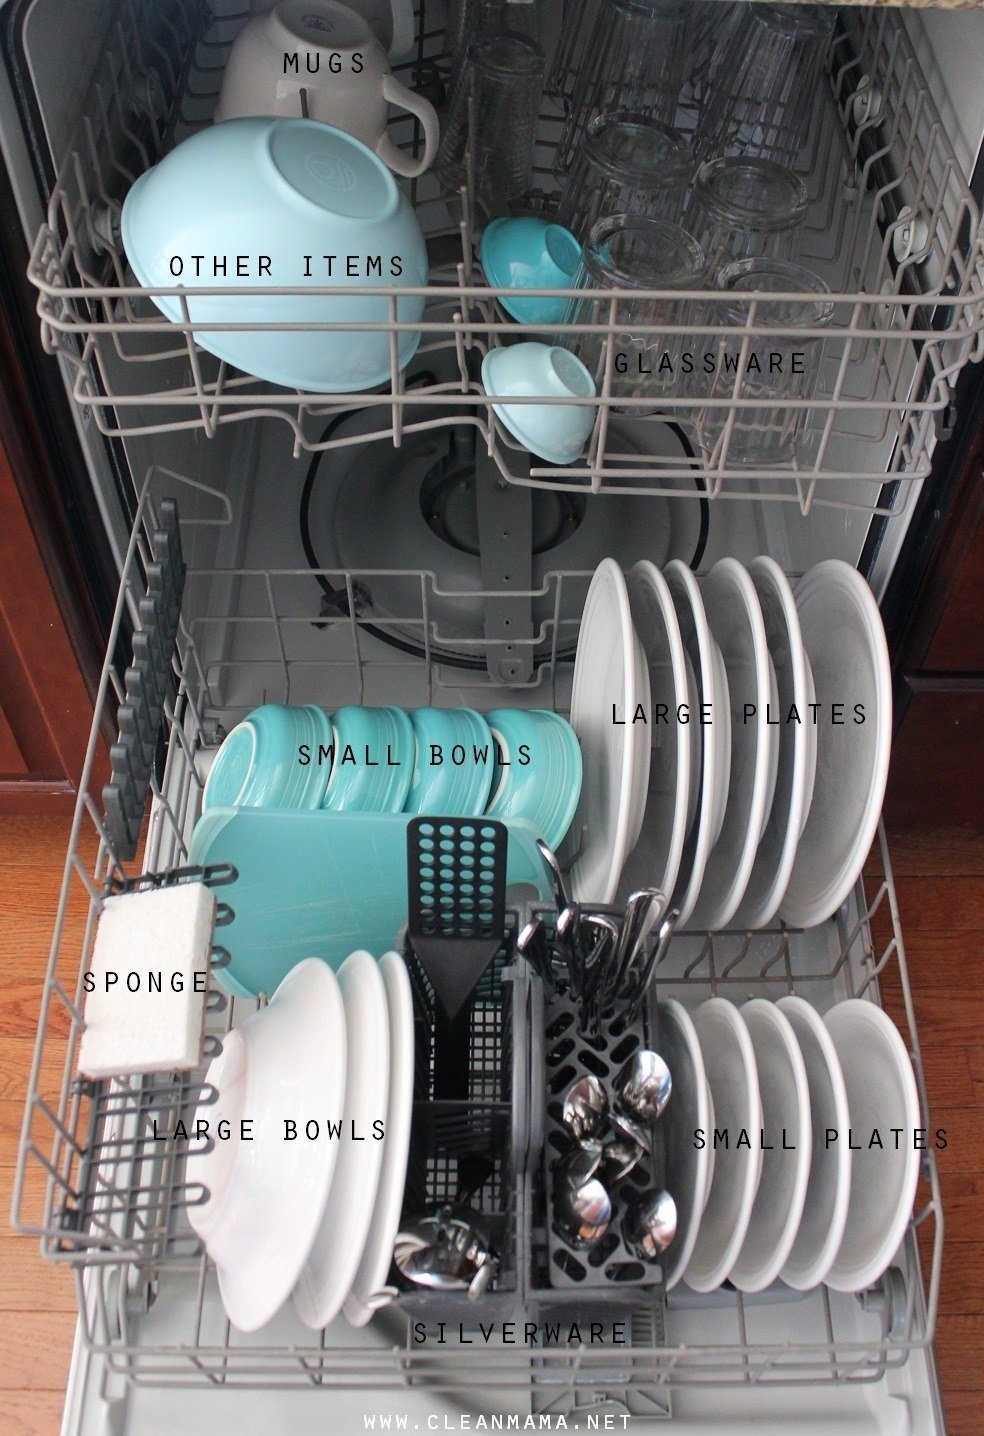 Your dishwasher uses the same amount of water and electricity no matter how many dishes are inside, so it&#x27;s most efficient to wait until it can wash the maximum number of dishes. From Clean Mama.